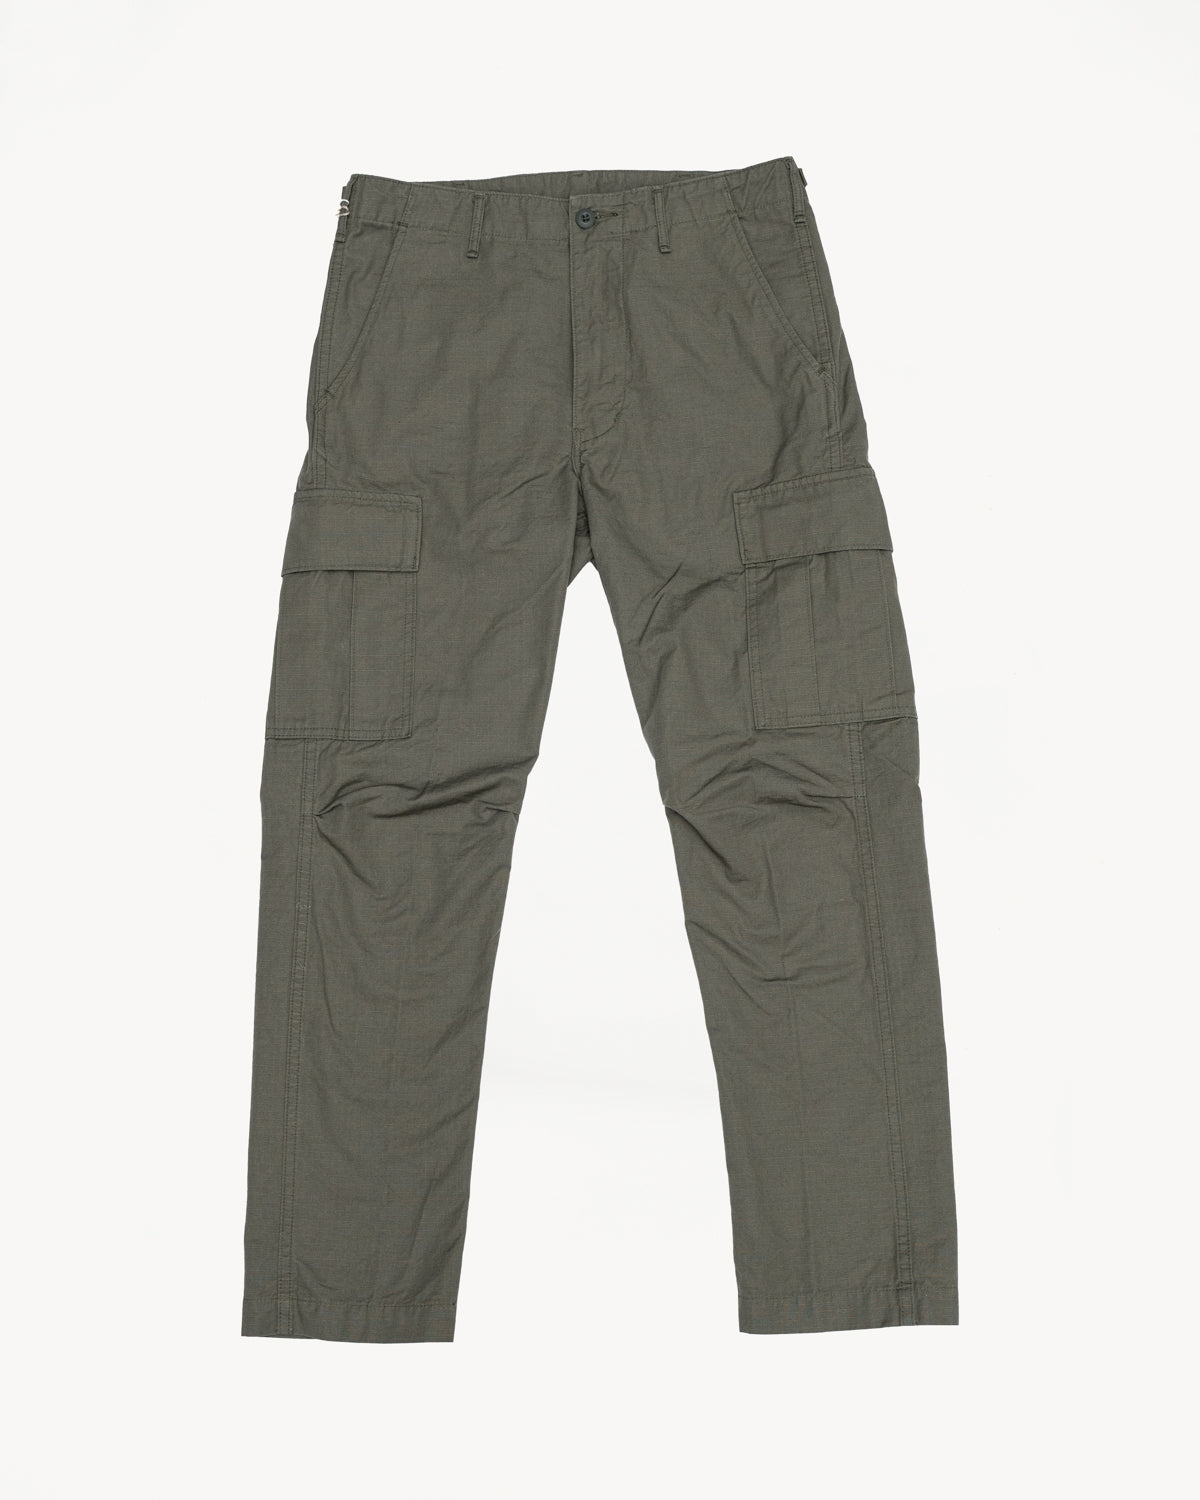 Mens Military Cargo Pants Latest Price, Mens Military Cargo Pants  Manufacturer in Ludhiana, India